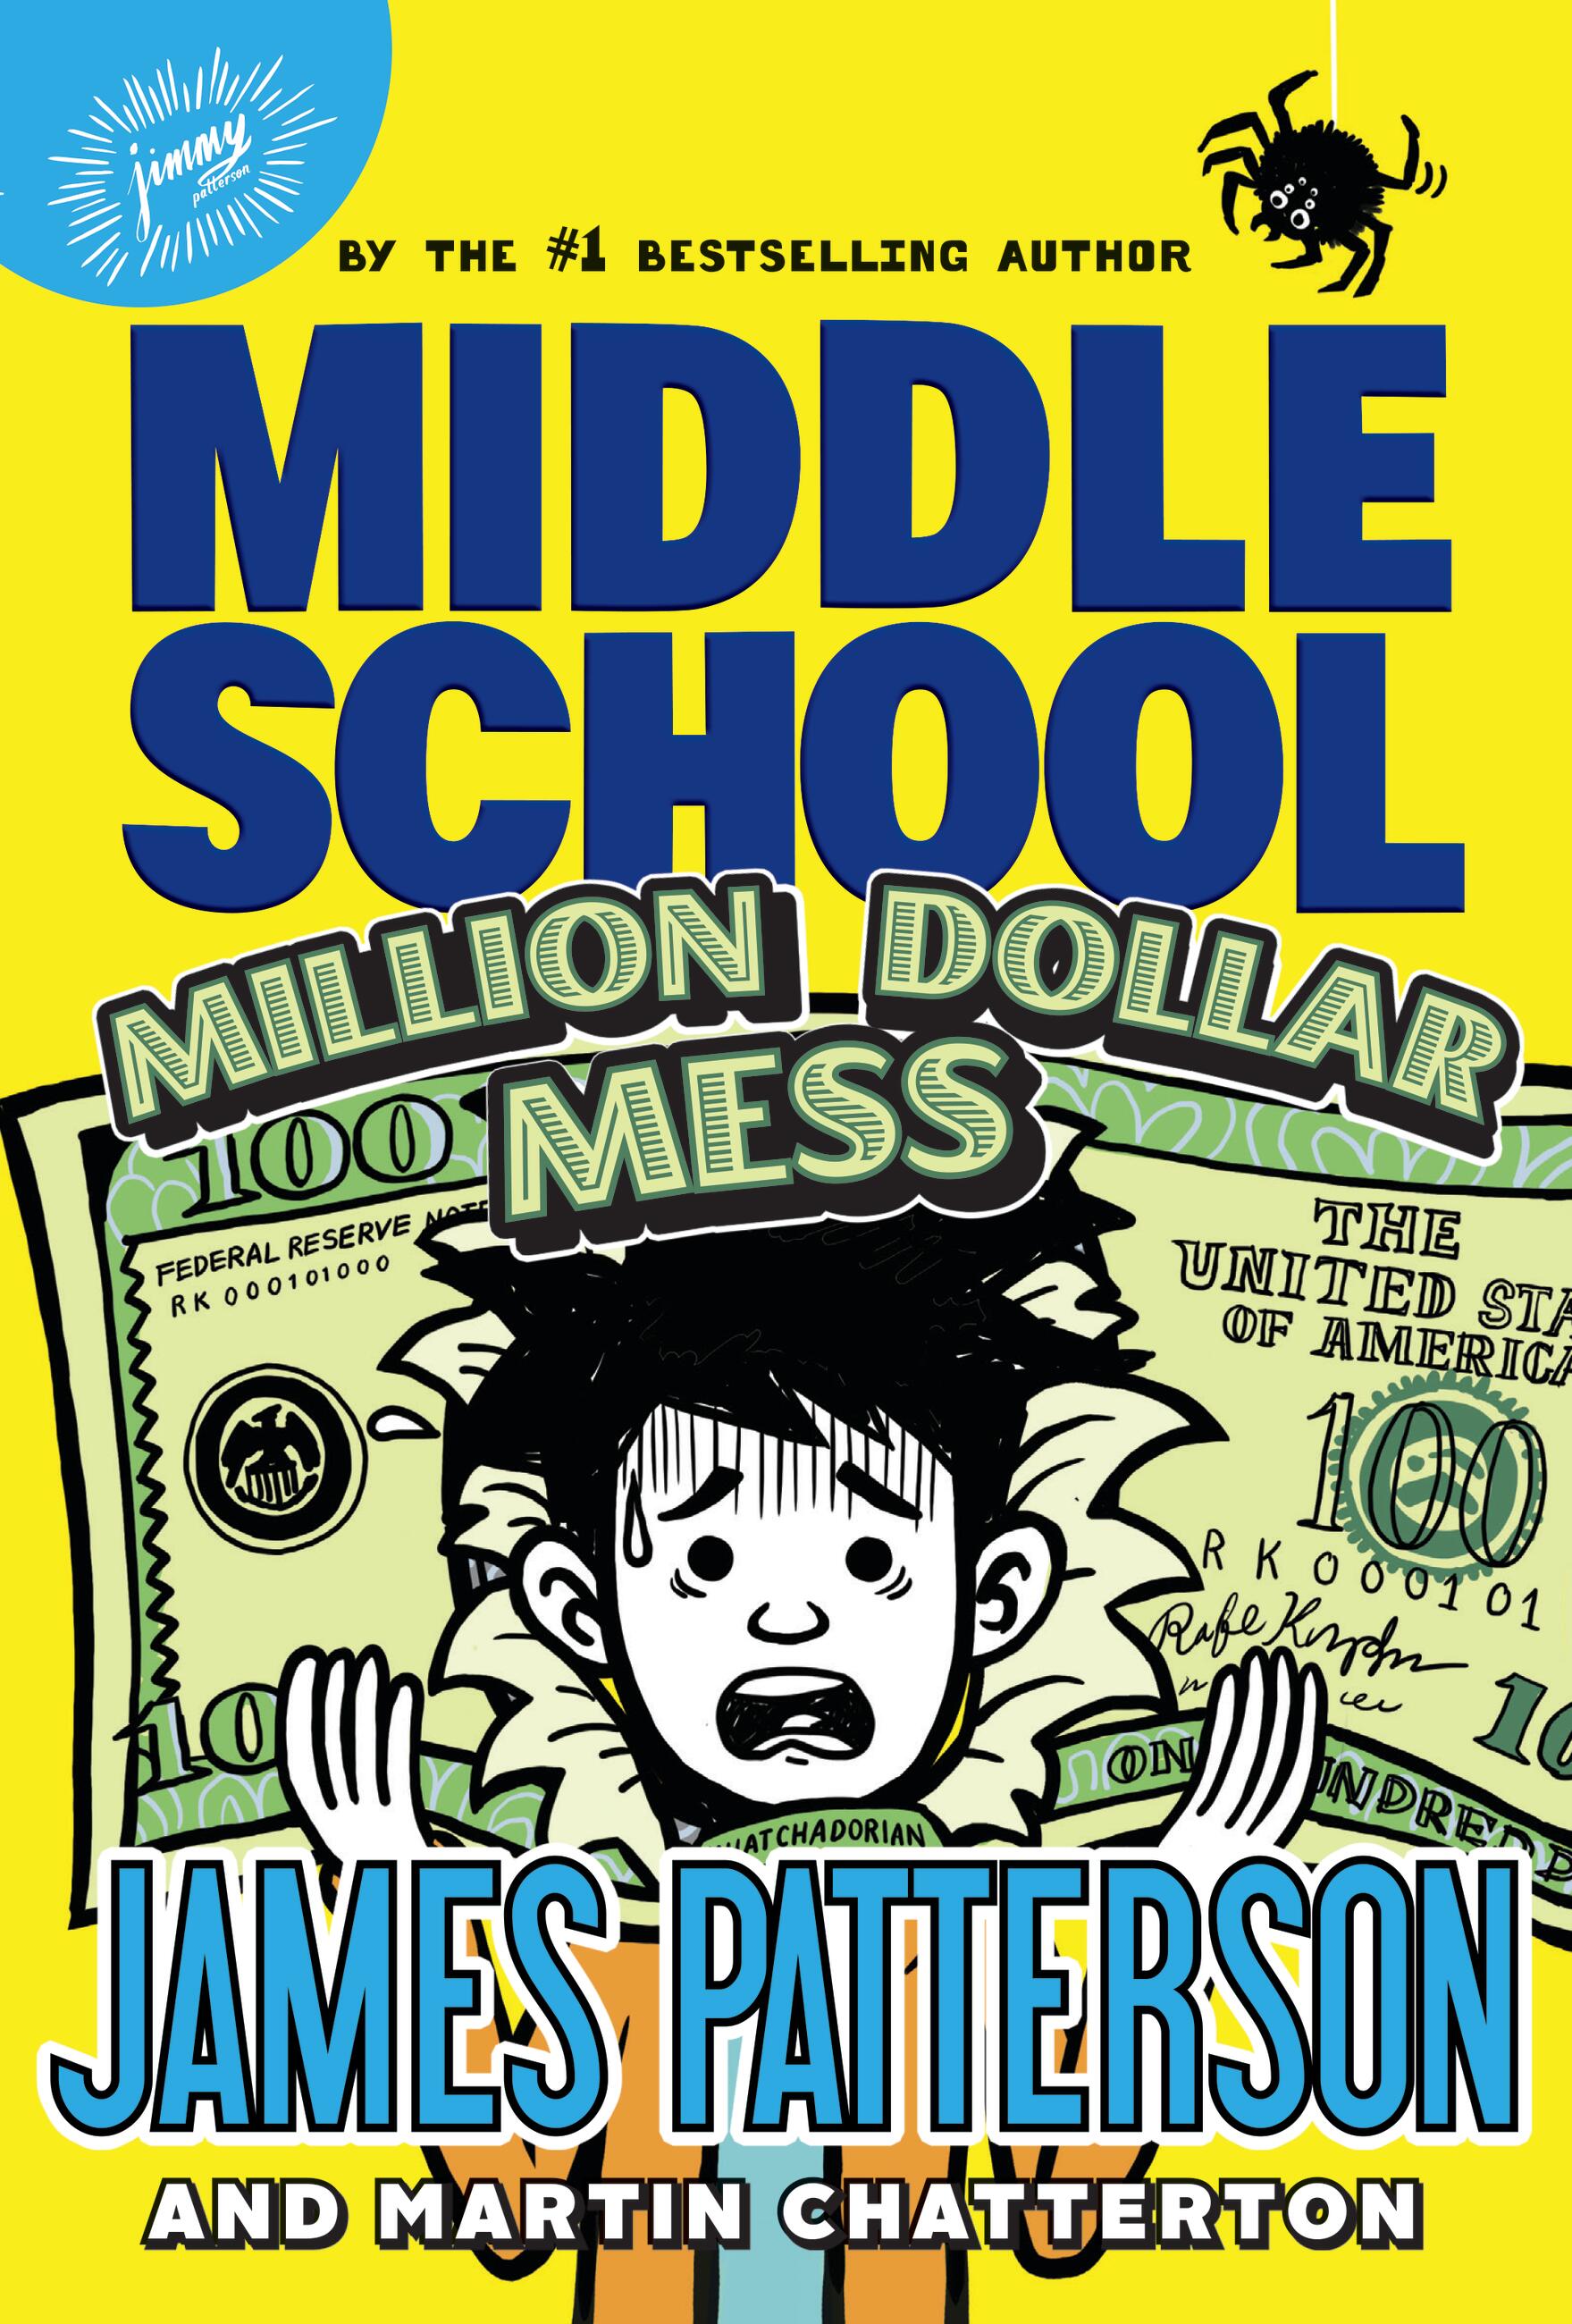 Middle School: Million Dollar Mess by James Patterson and Martin Chatterton